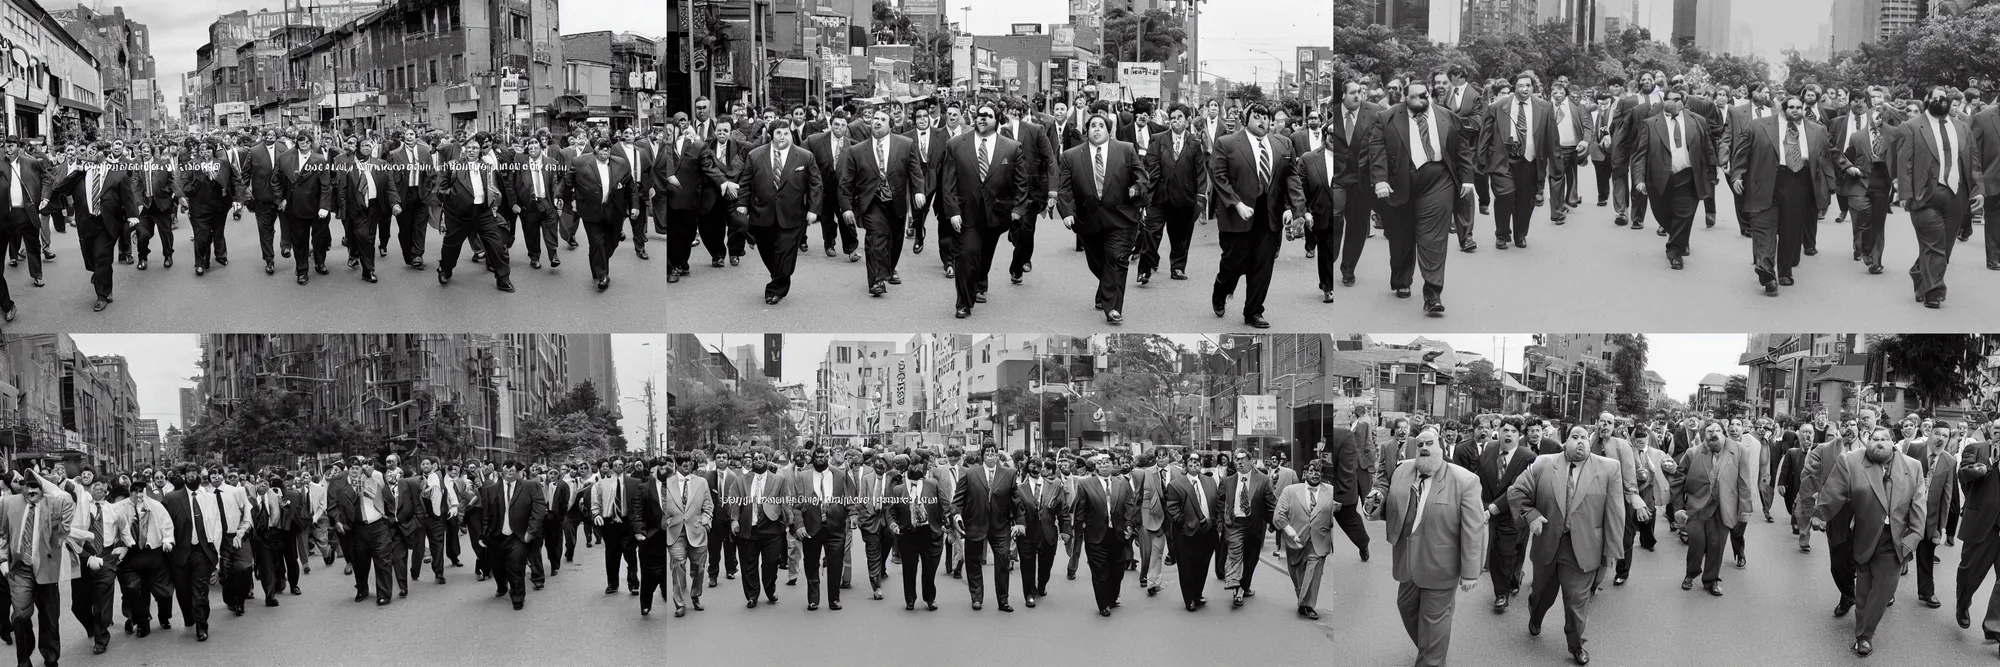 Prompt: A large group of chubby men in suits and neckties parading through the street canes, overcast day, 1990s.